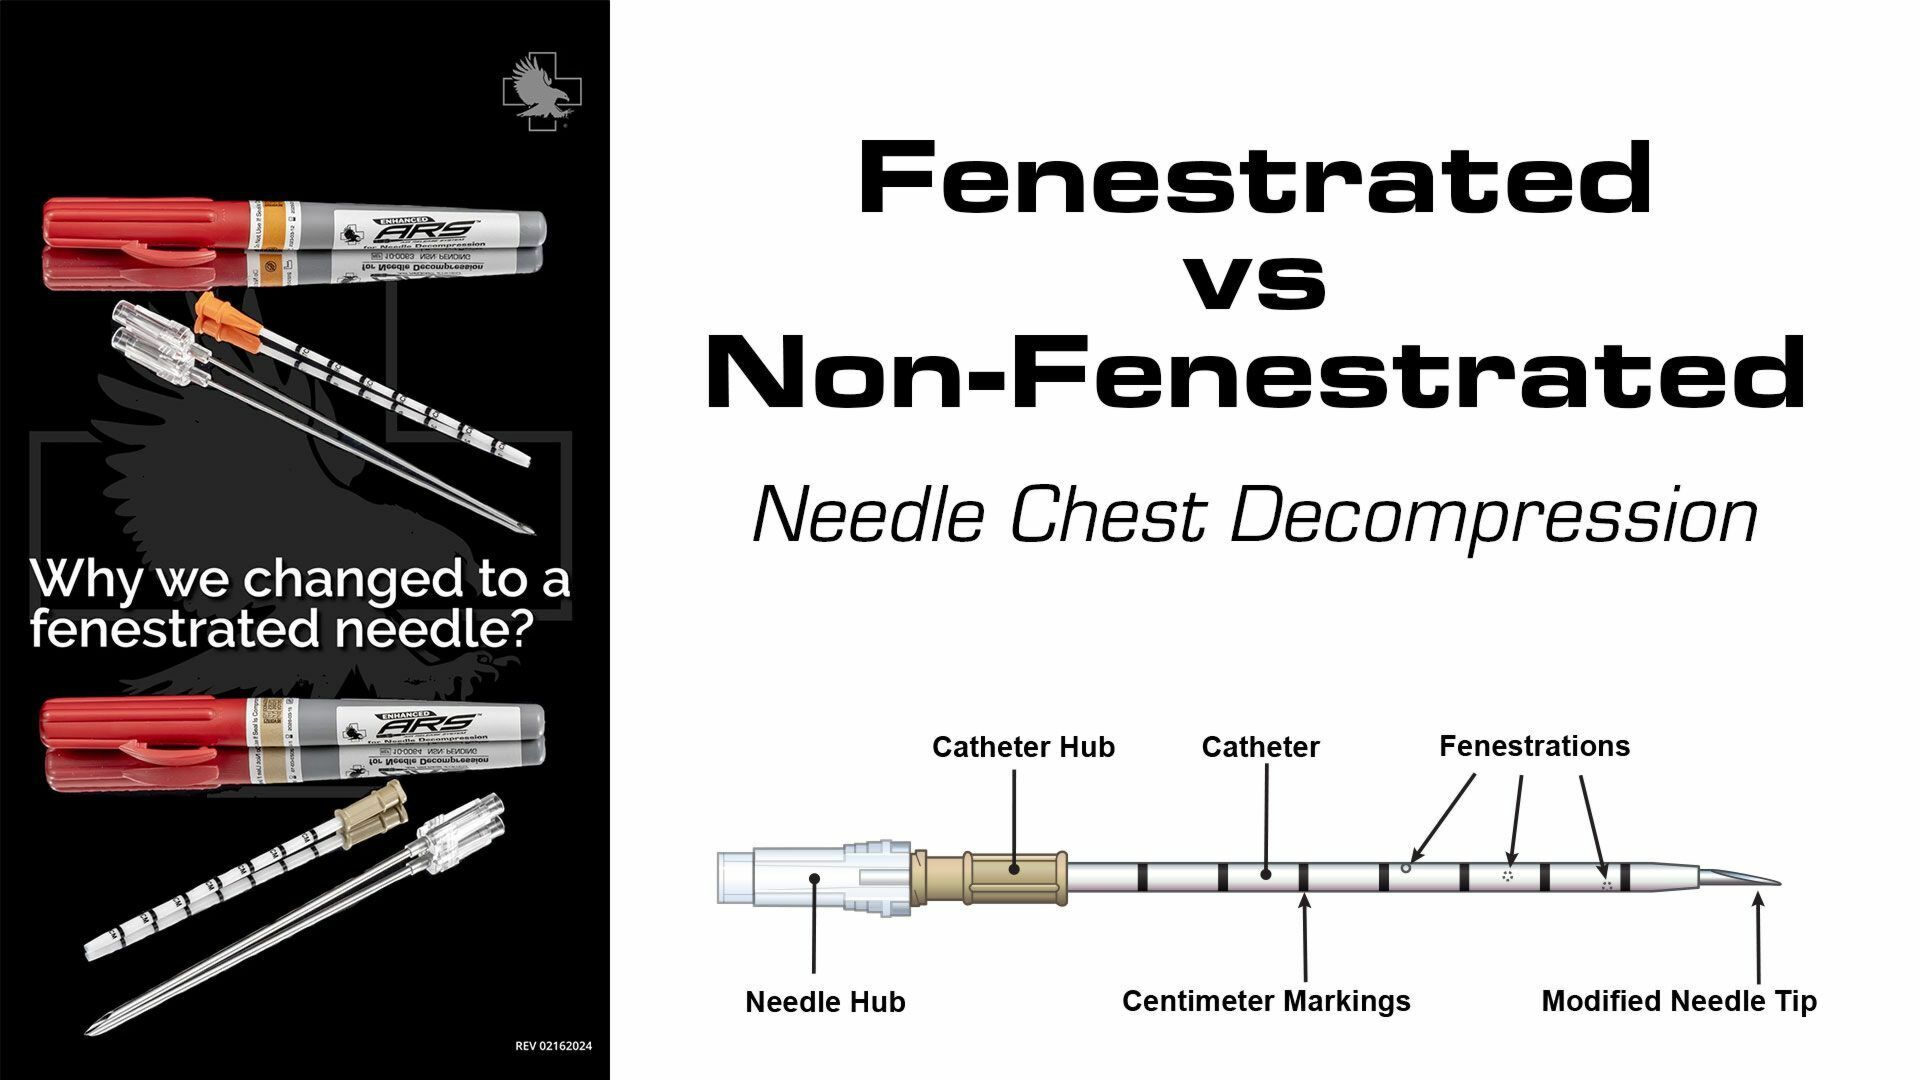 Fenestrated vs Non-Fenestrated